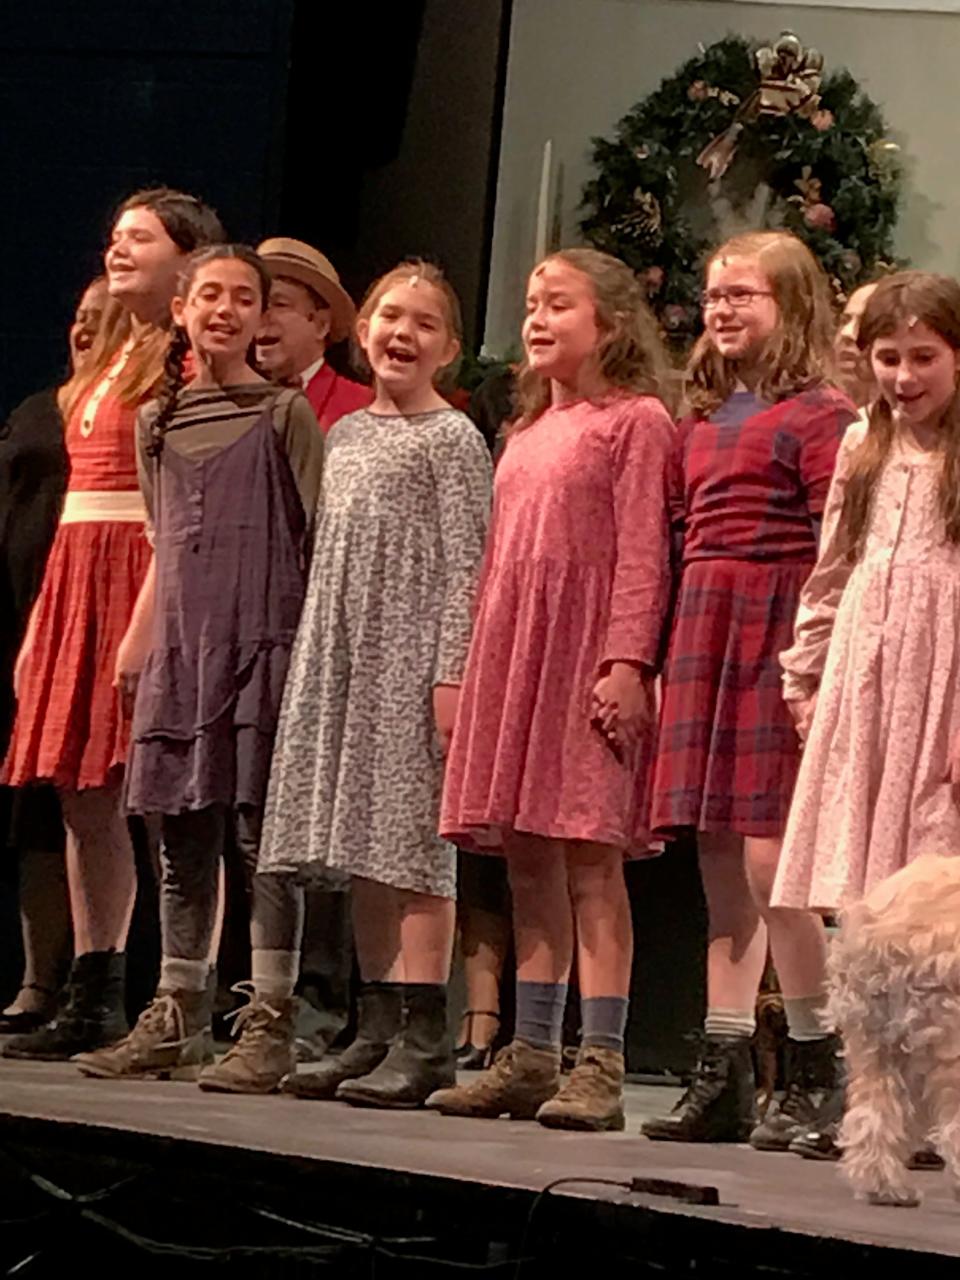 Samantha Boragine (center) performing as an orphan in a production of Annie, with The Community Players in Pawtucket, RI, 2017